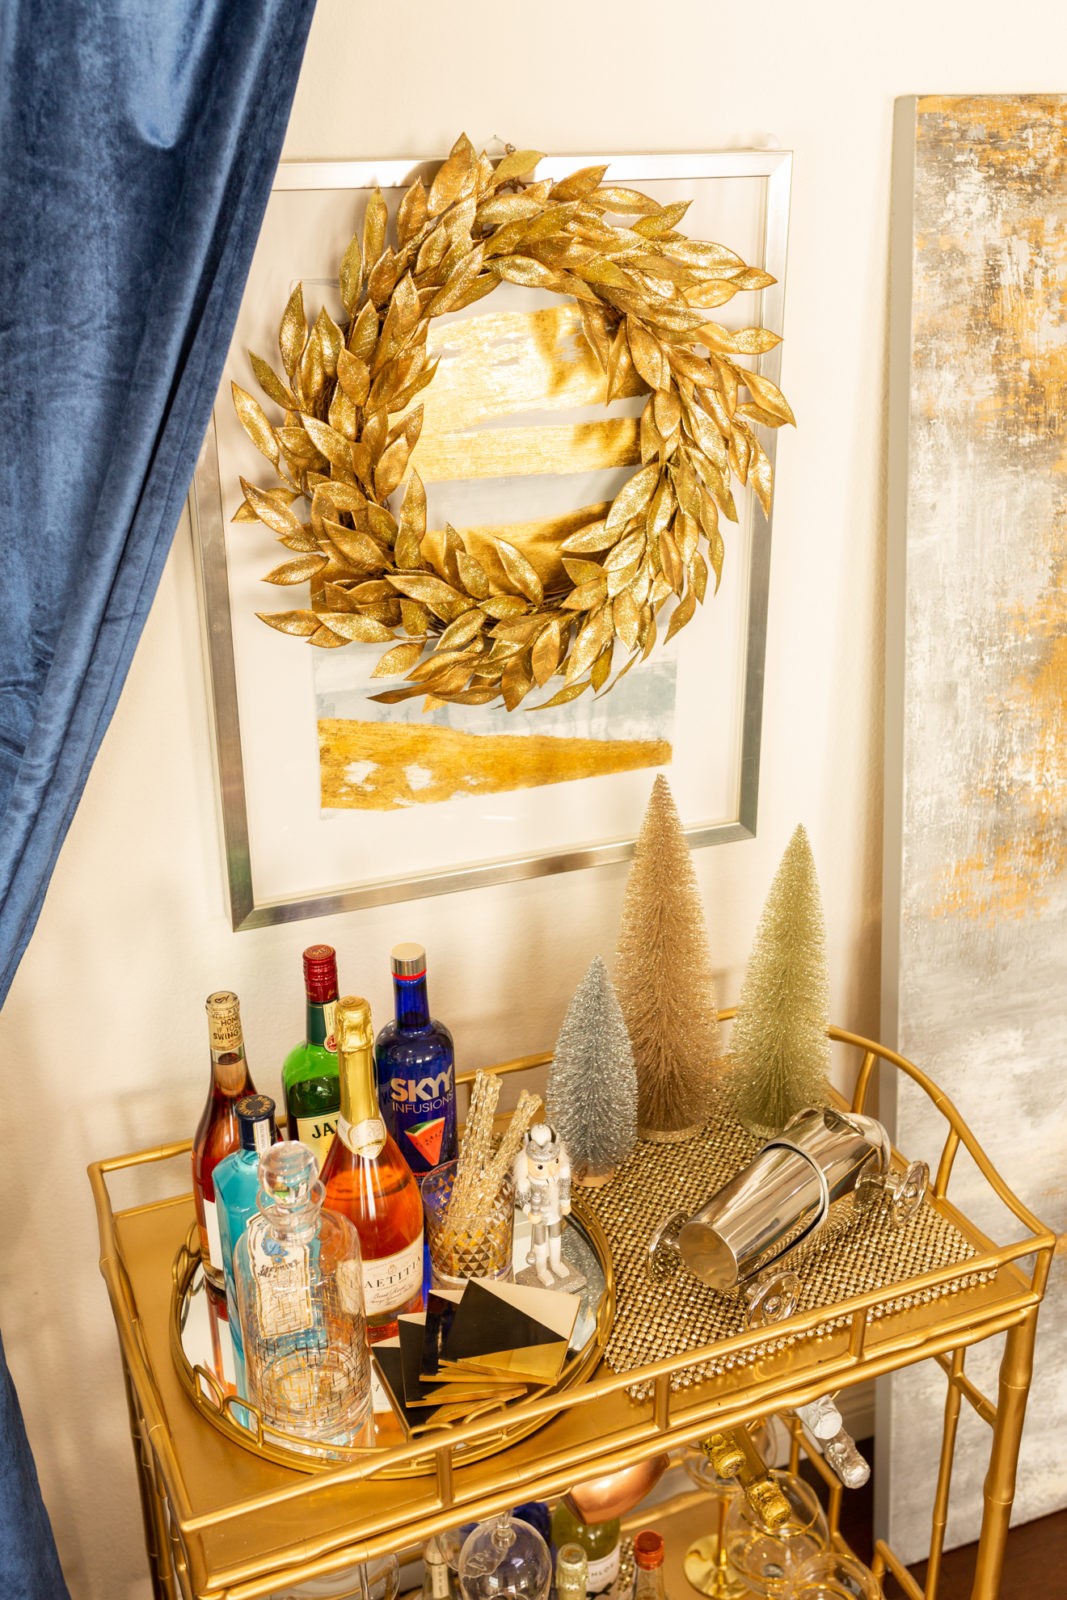 How to Setup a Holiday Bar Cart for a Party, Holiday Bar Cart Ideas,How to Decorate a Holiday Bar Cart in 5 Simple Steps by Home Decor Blogger Laura Lily,